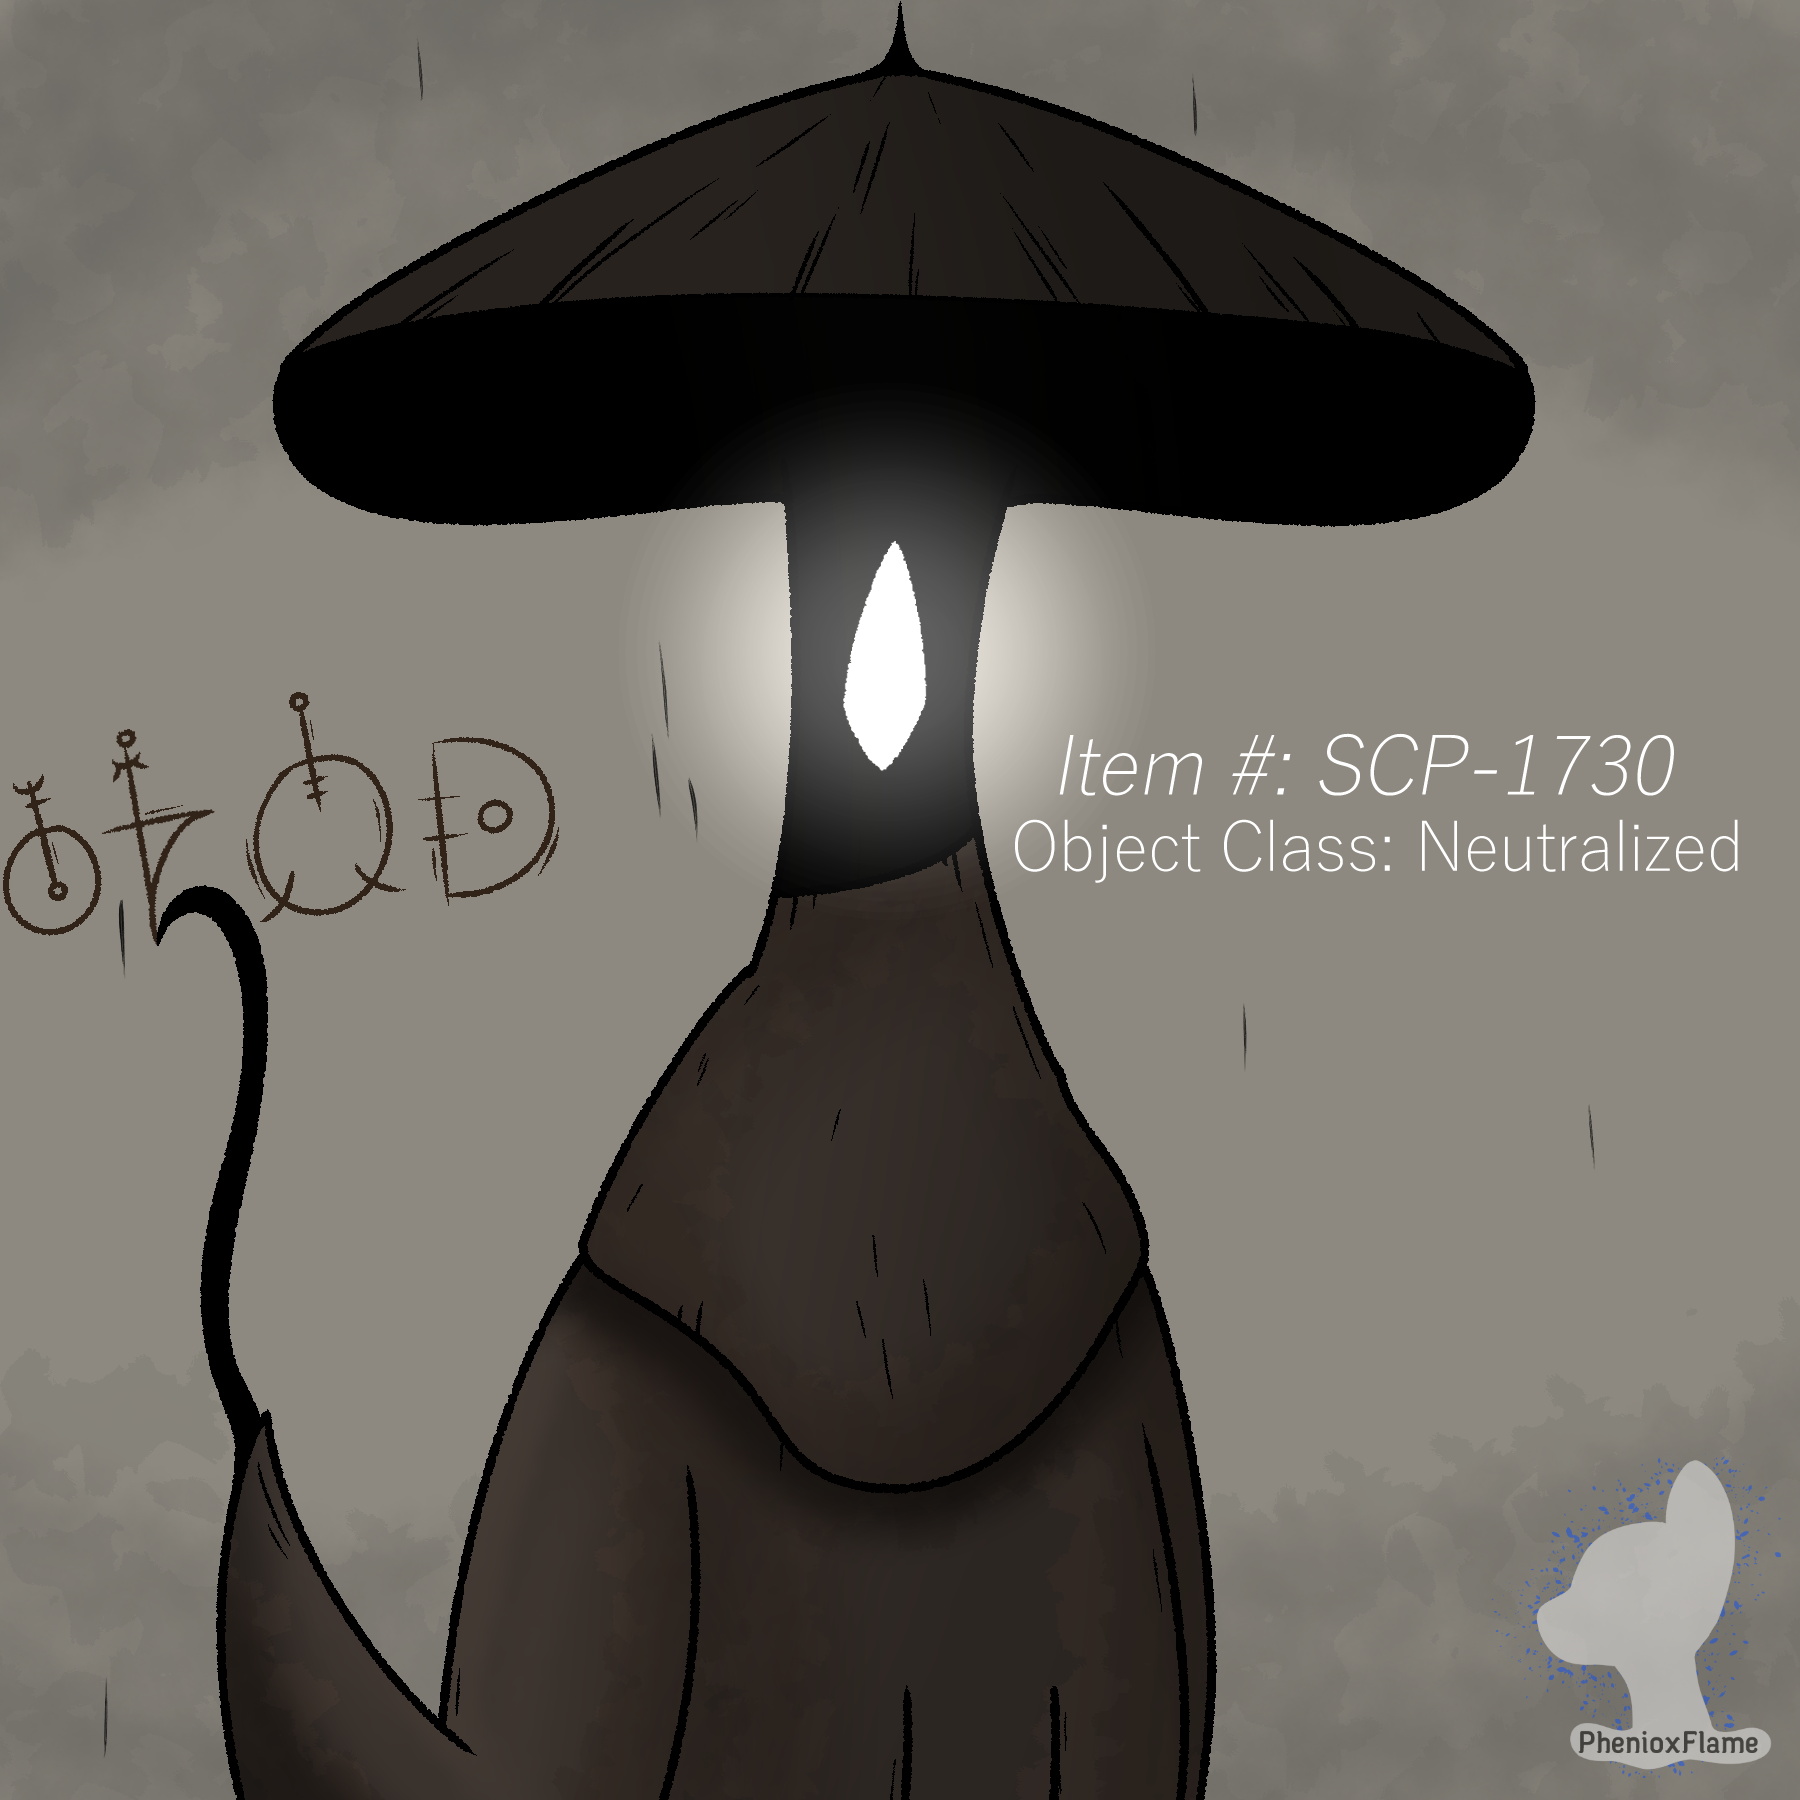 Scp- 1730 by PhenioxFlame on DeviantArt